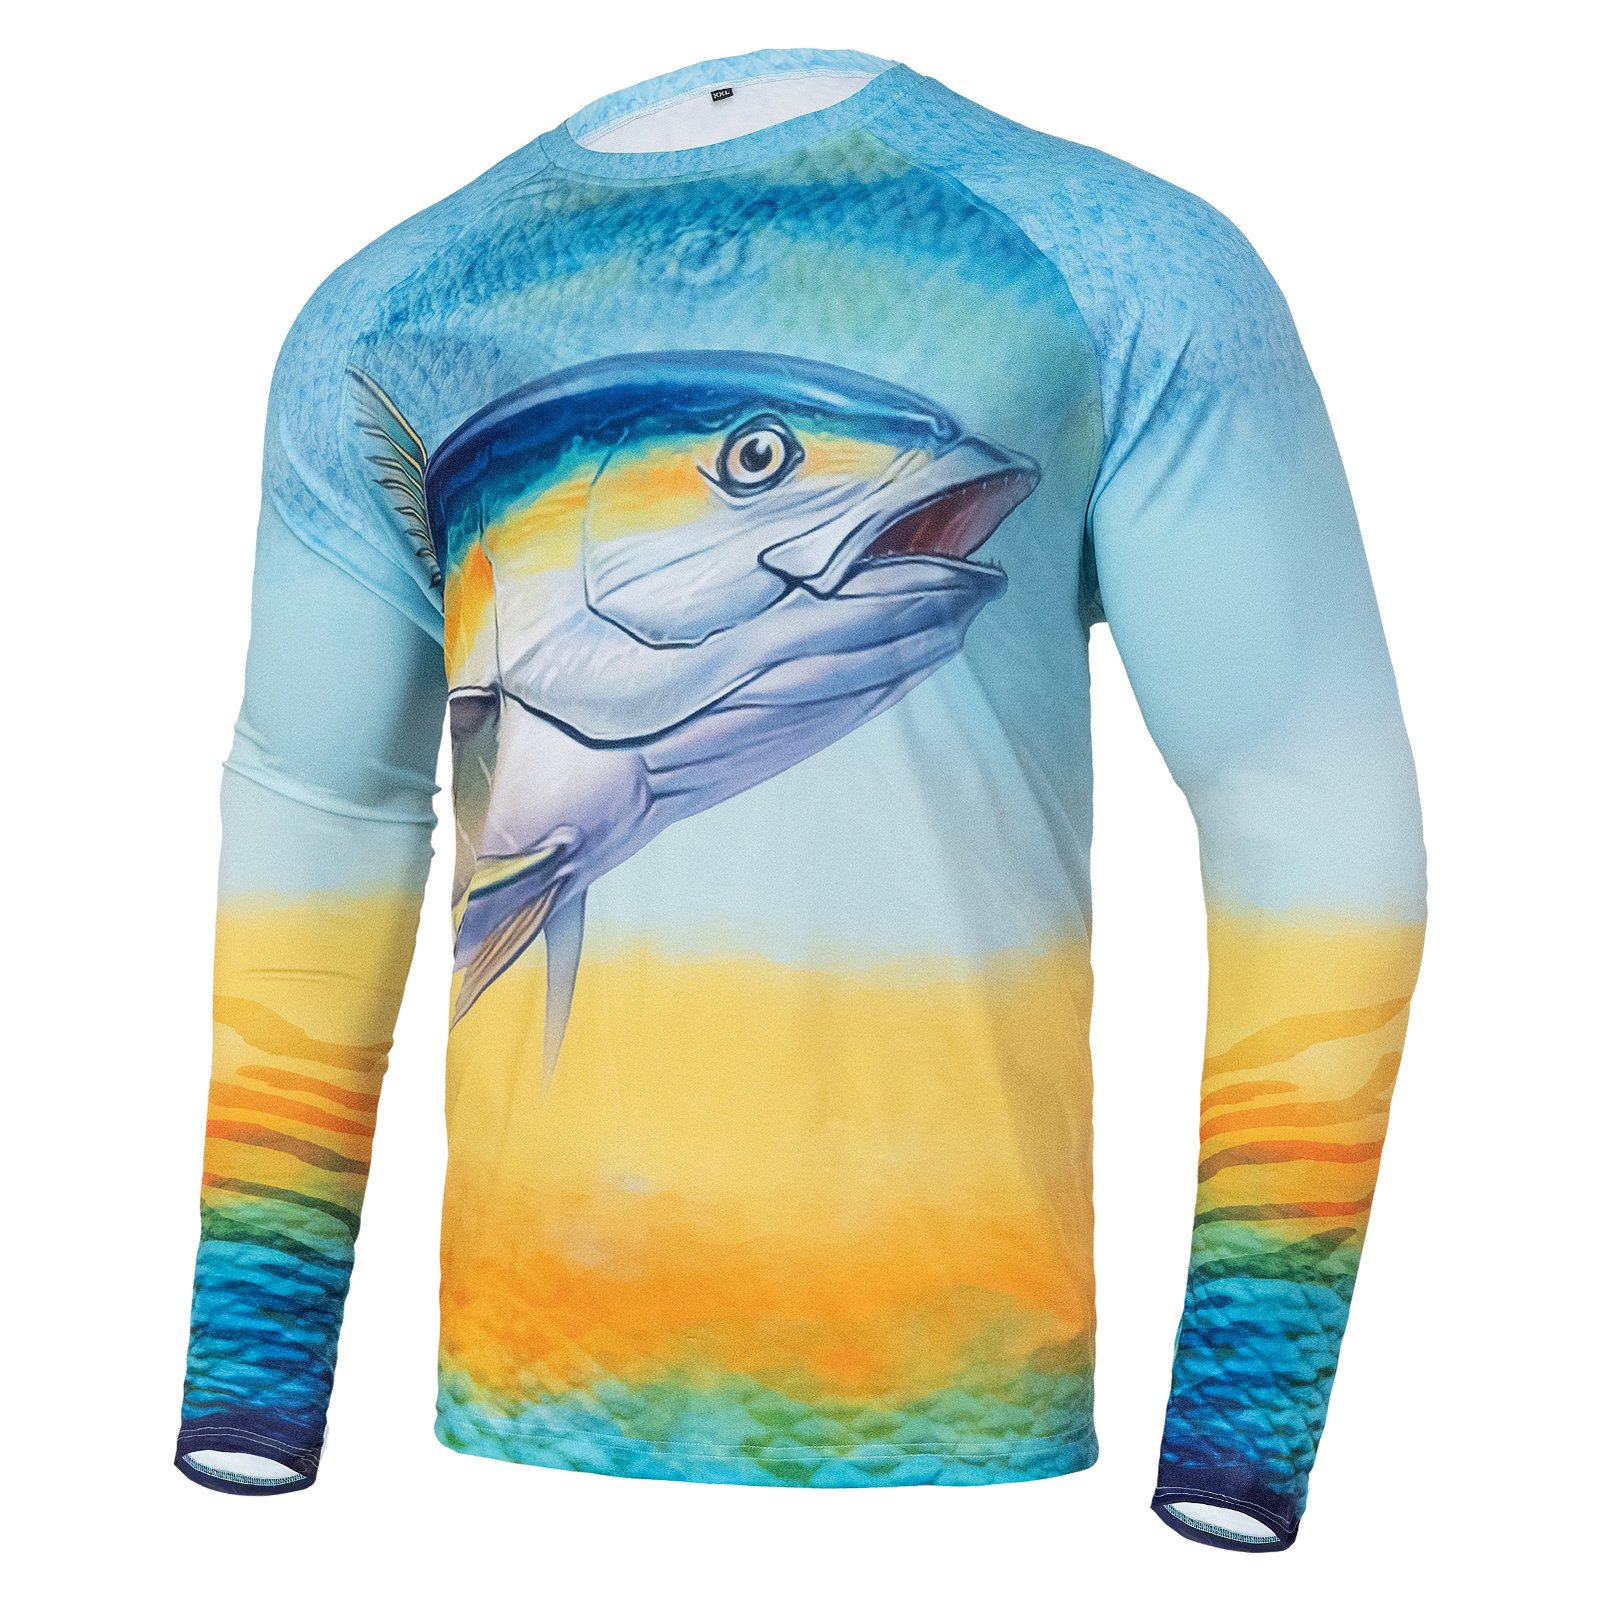 Salty Tuna - Mens Performance Long Sleeve Spot Print. Yizzam.com, where all  the street stopping style t-shirts go!  Looking for a funny t-shirt, a  cool t-shirt, a crazy t-shirt? Come inside